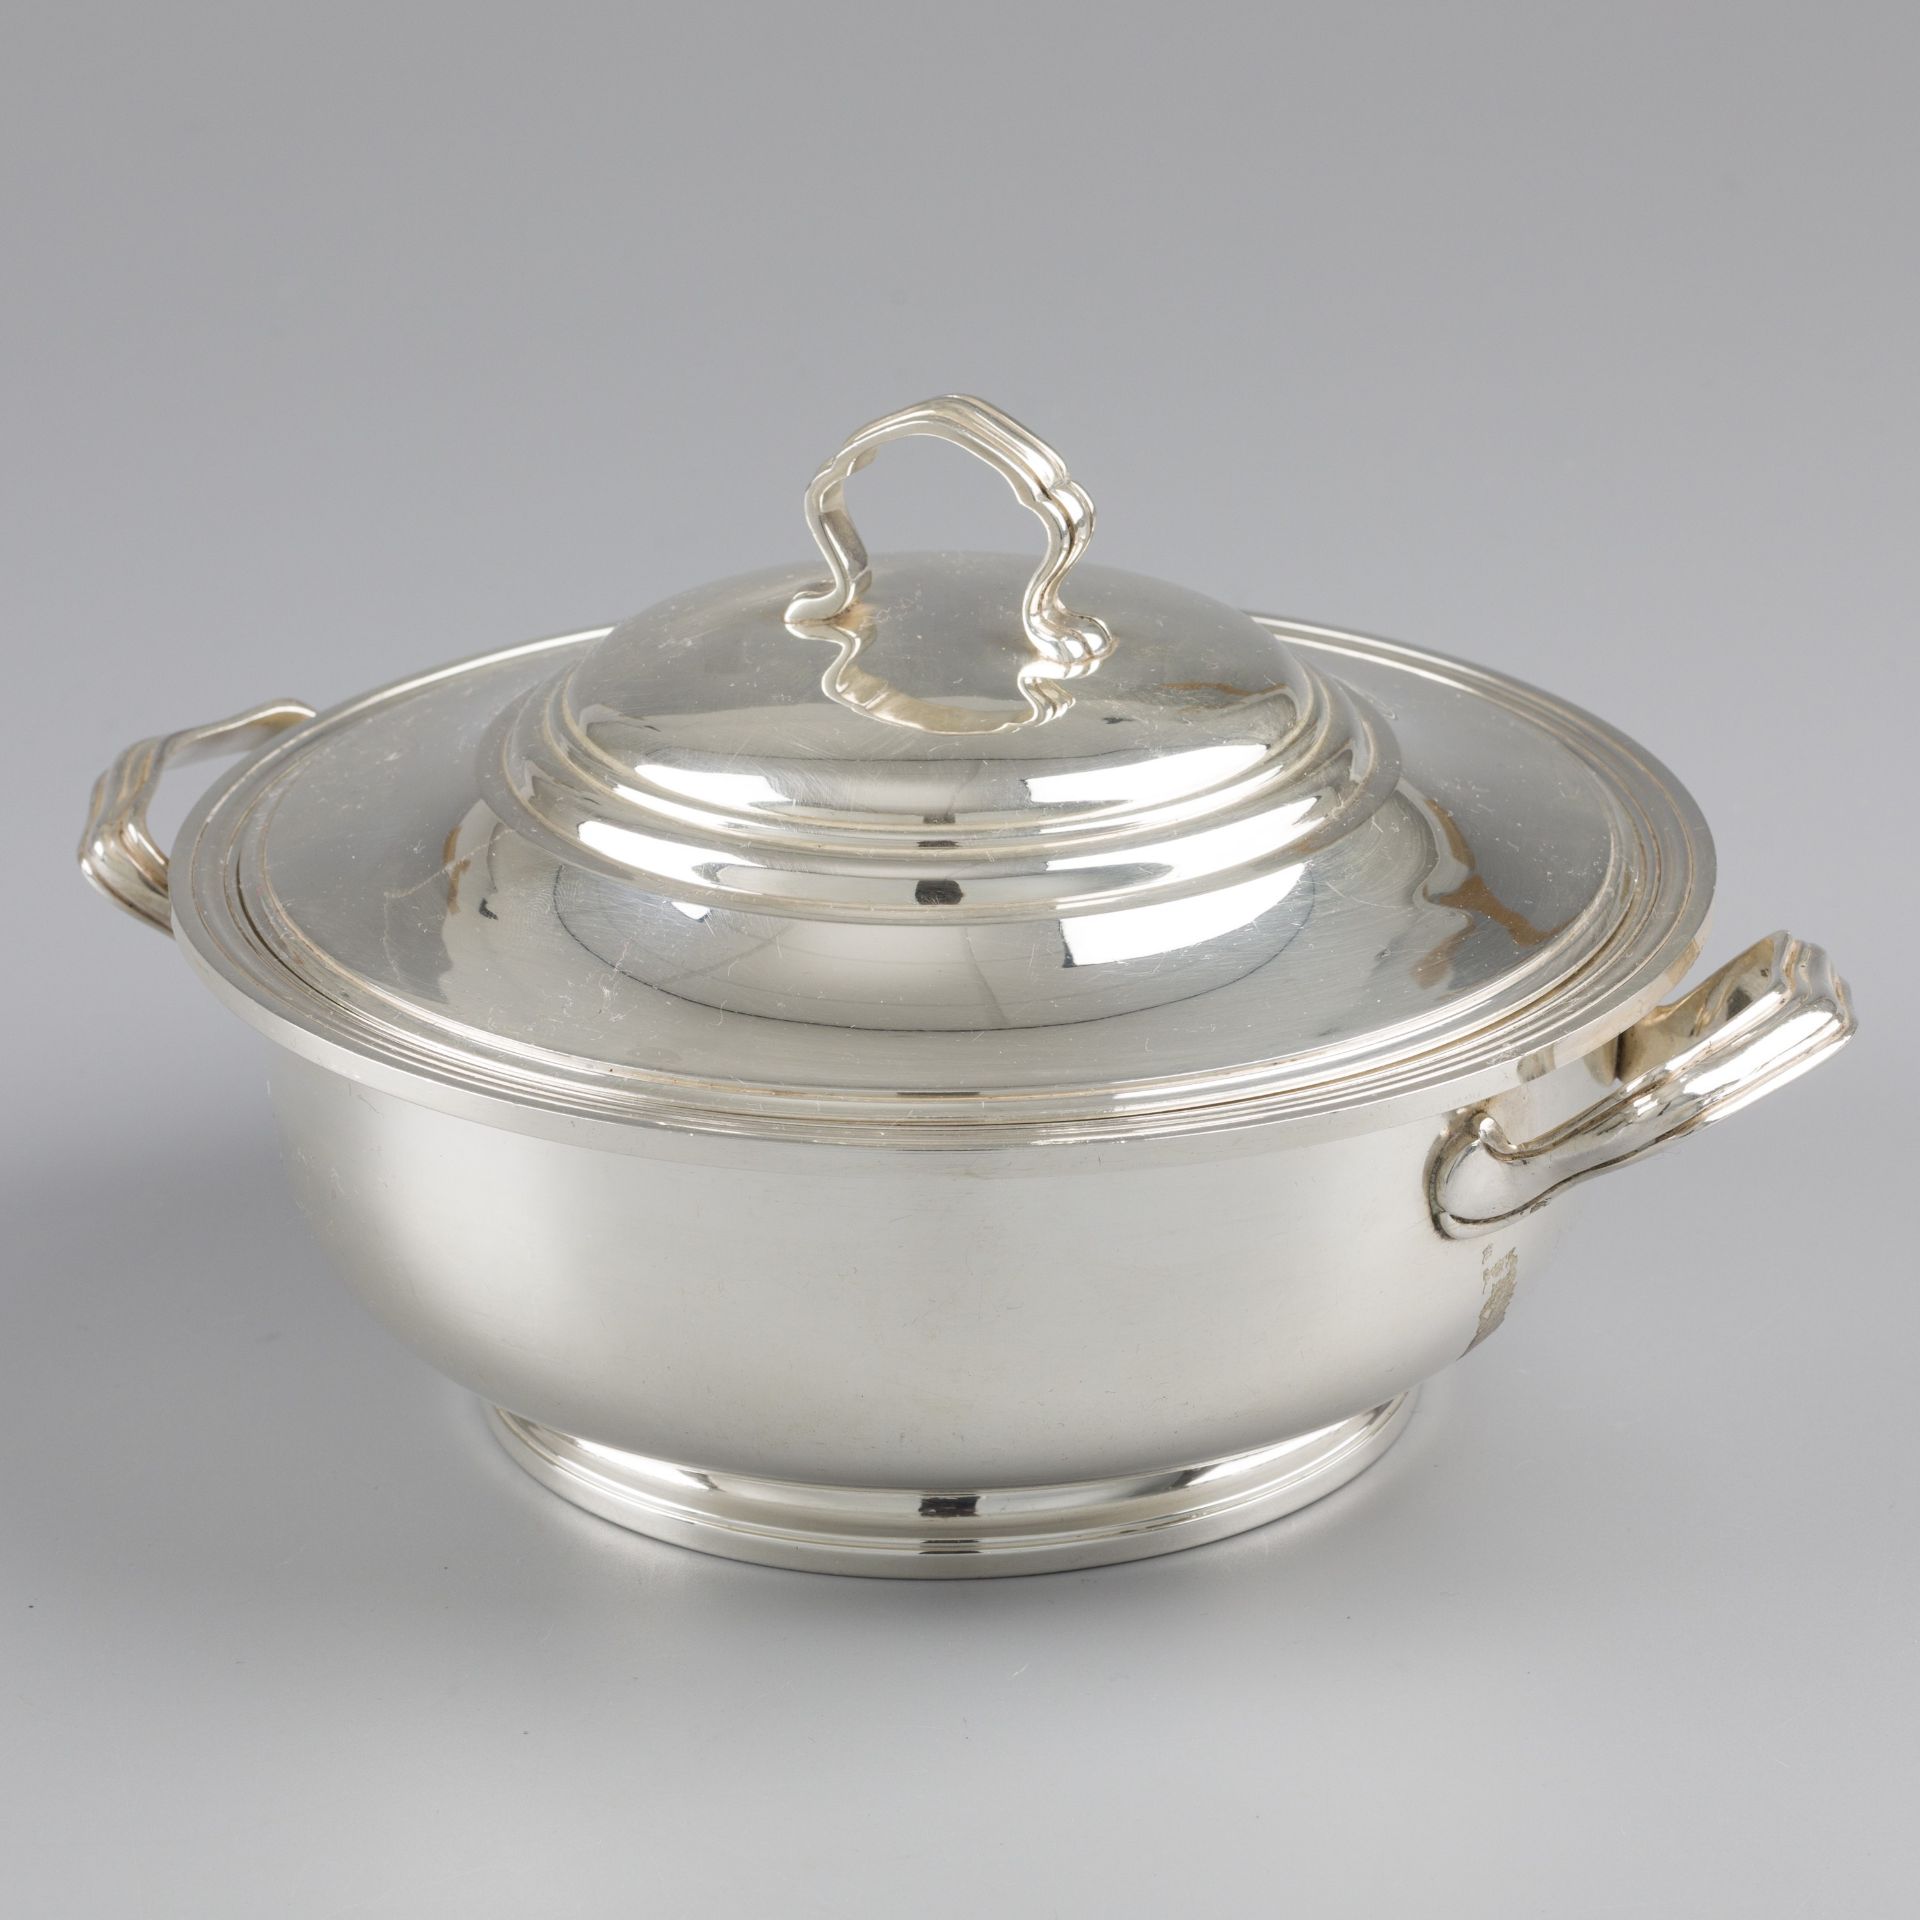 Covered serving dish silver.